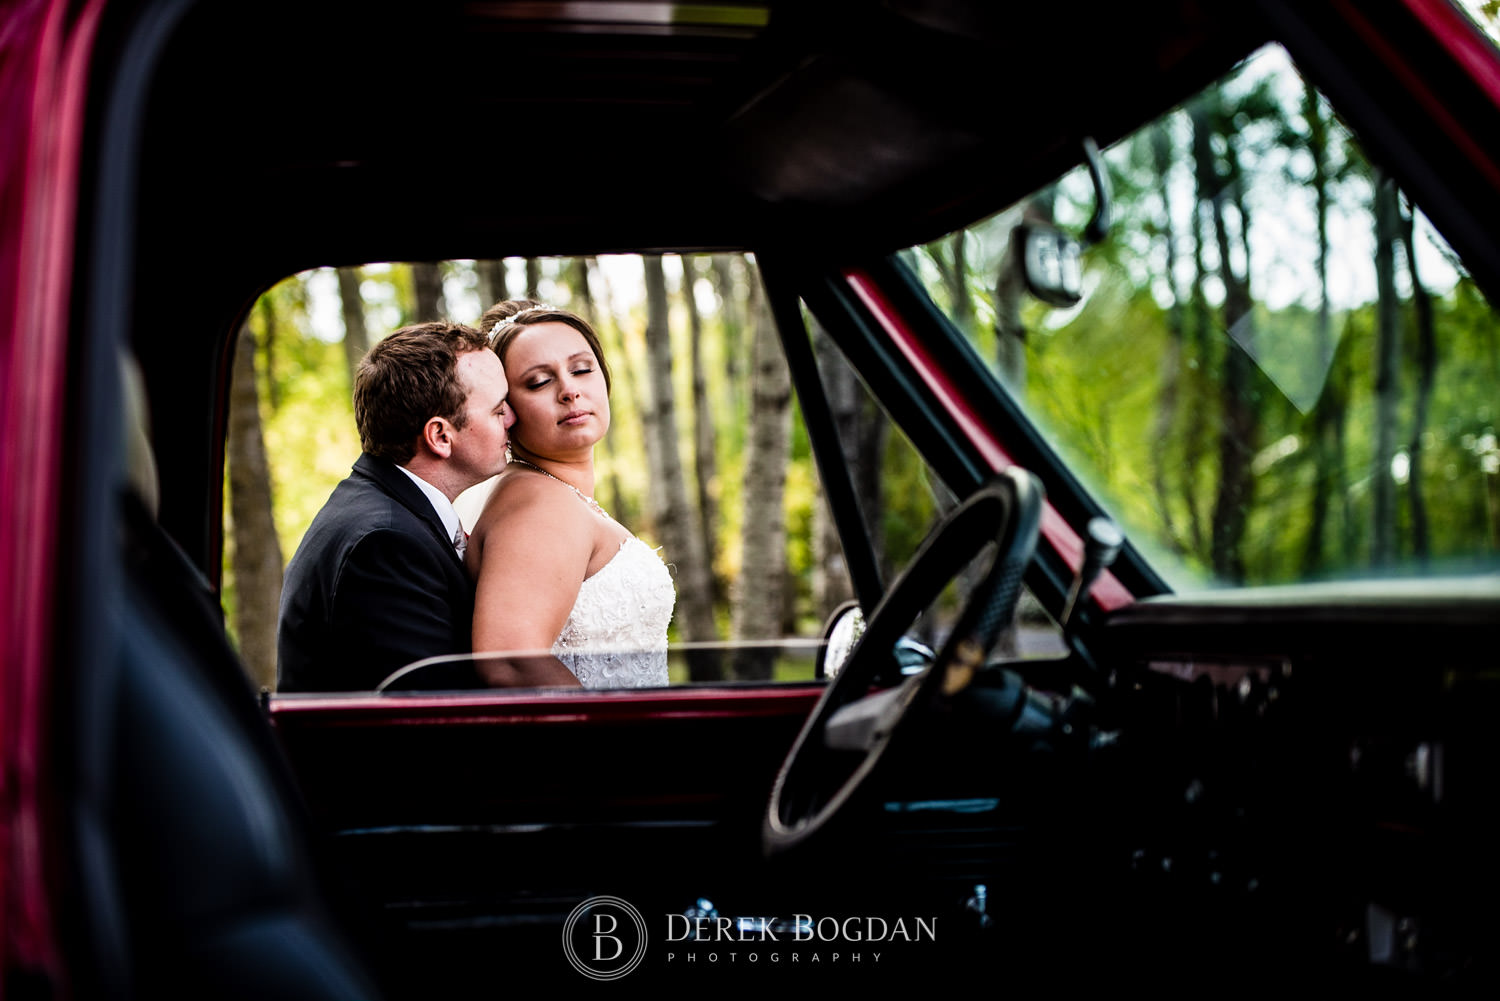 Bride with groom and truck creative outdoor wedding photo